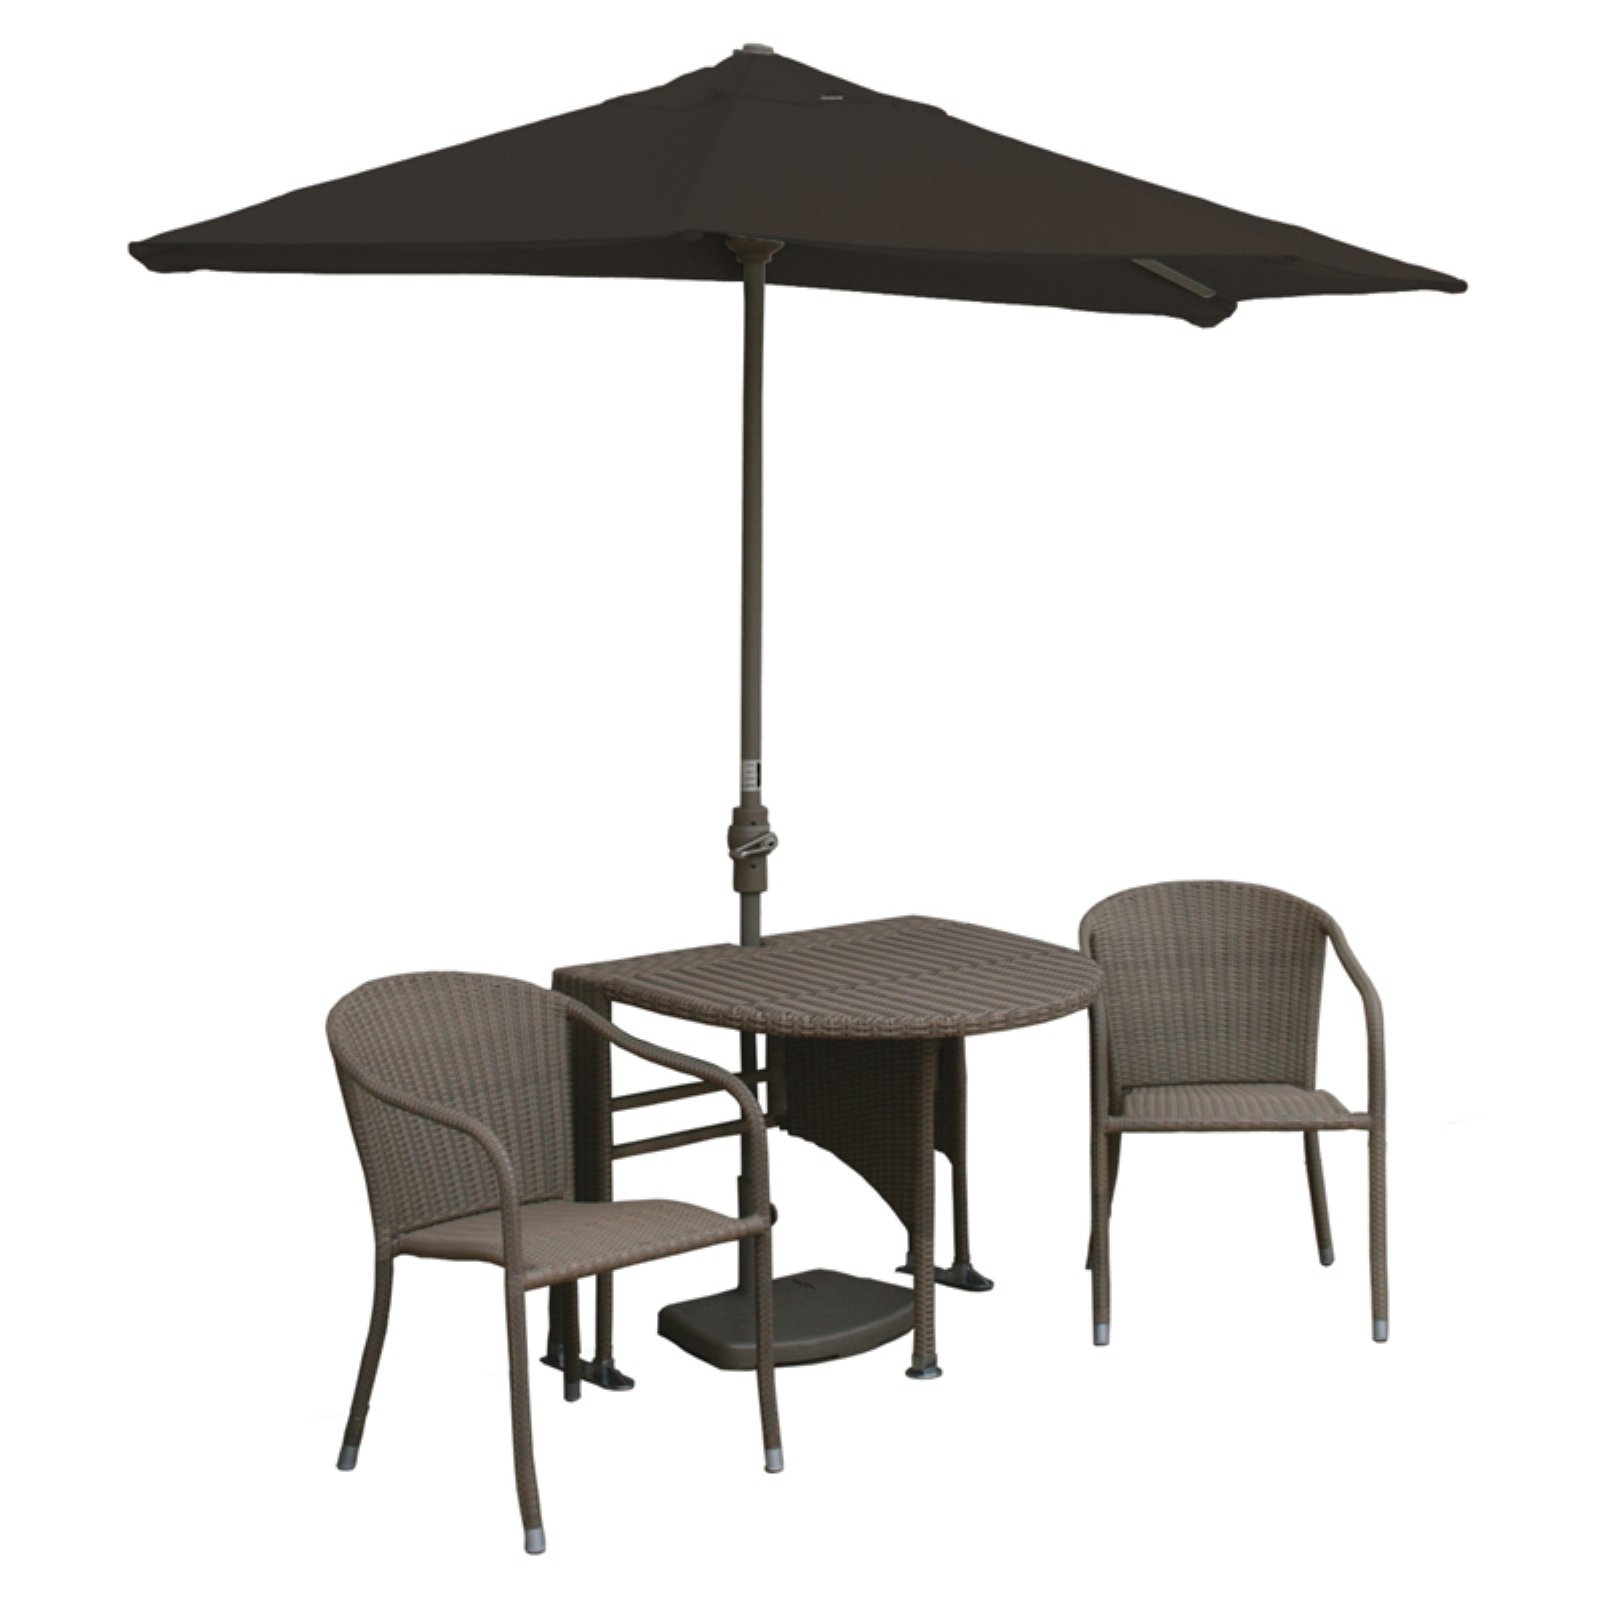 Blue Star Group Terrace Mates Genevieve All-Weather Wicker Coffee Color Table Set w/ 9'-Wide OFF-THE-WALL BRELLA - Chocolate Olefin Canopy - image 1 of 9